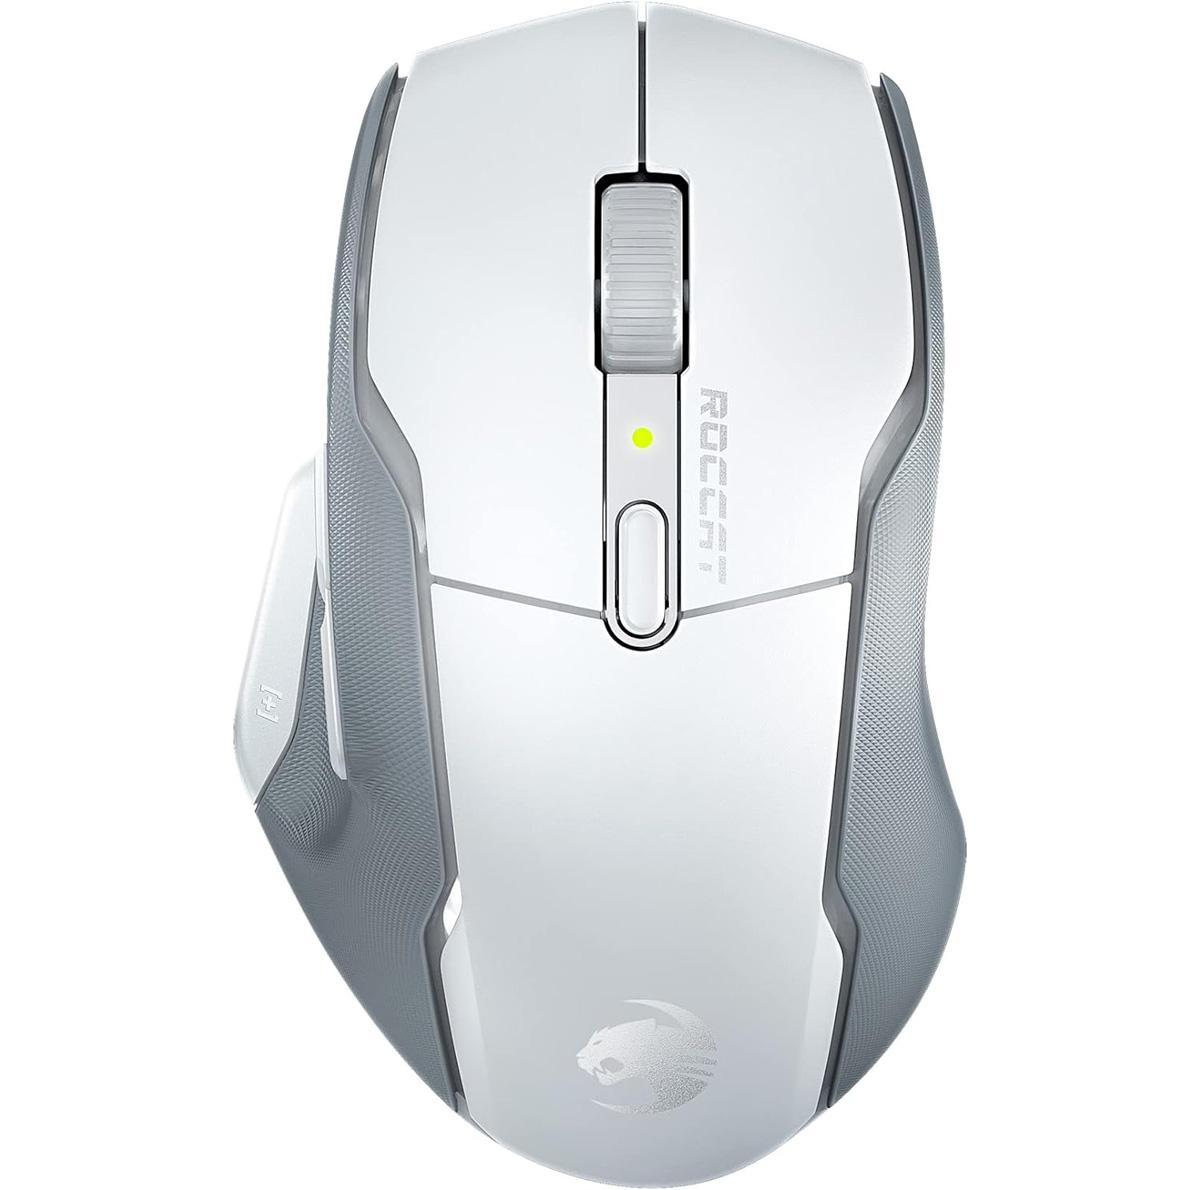 Roccat Kone Air Wireless Optical Gaming Mouse for $24.99